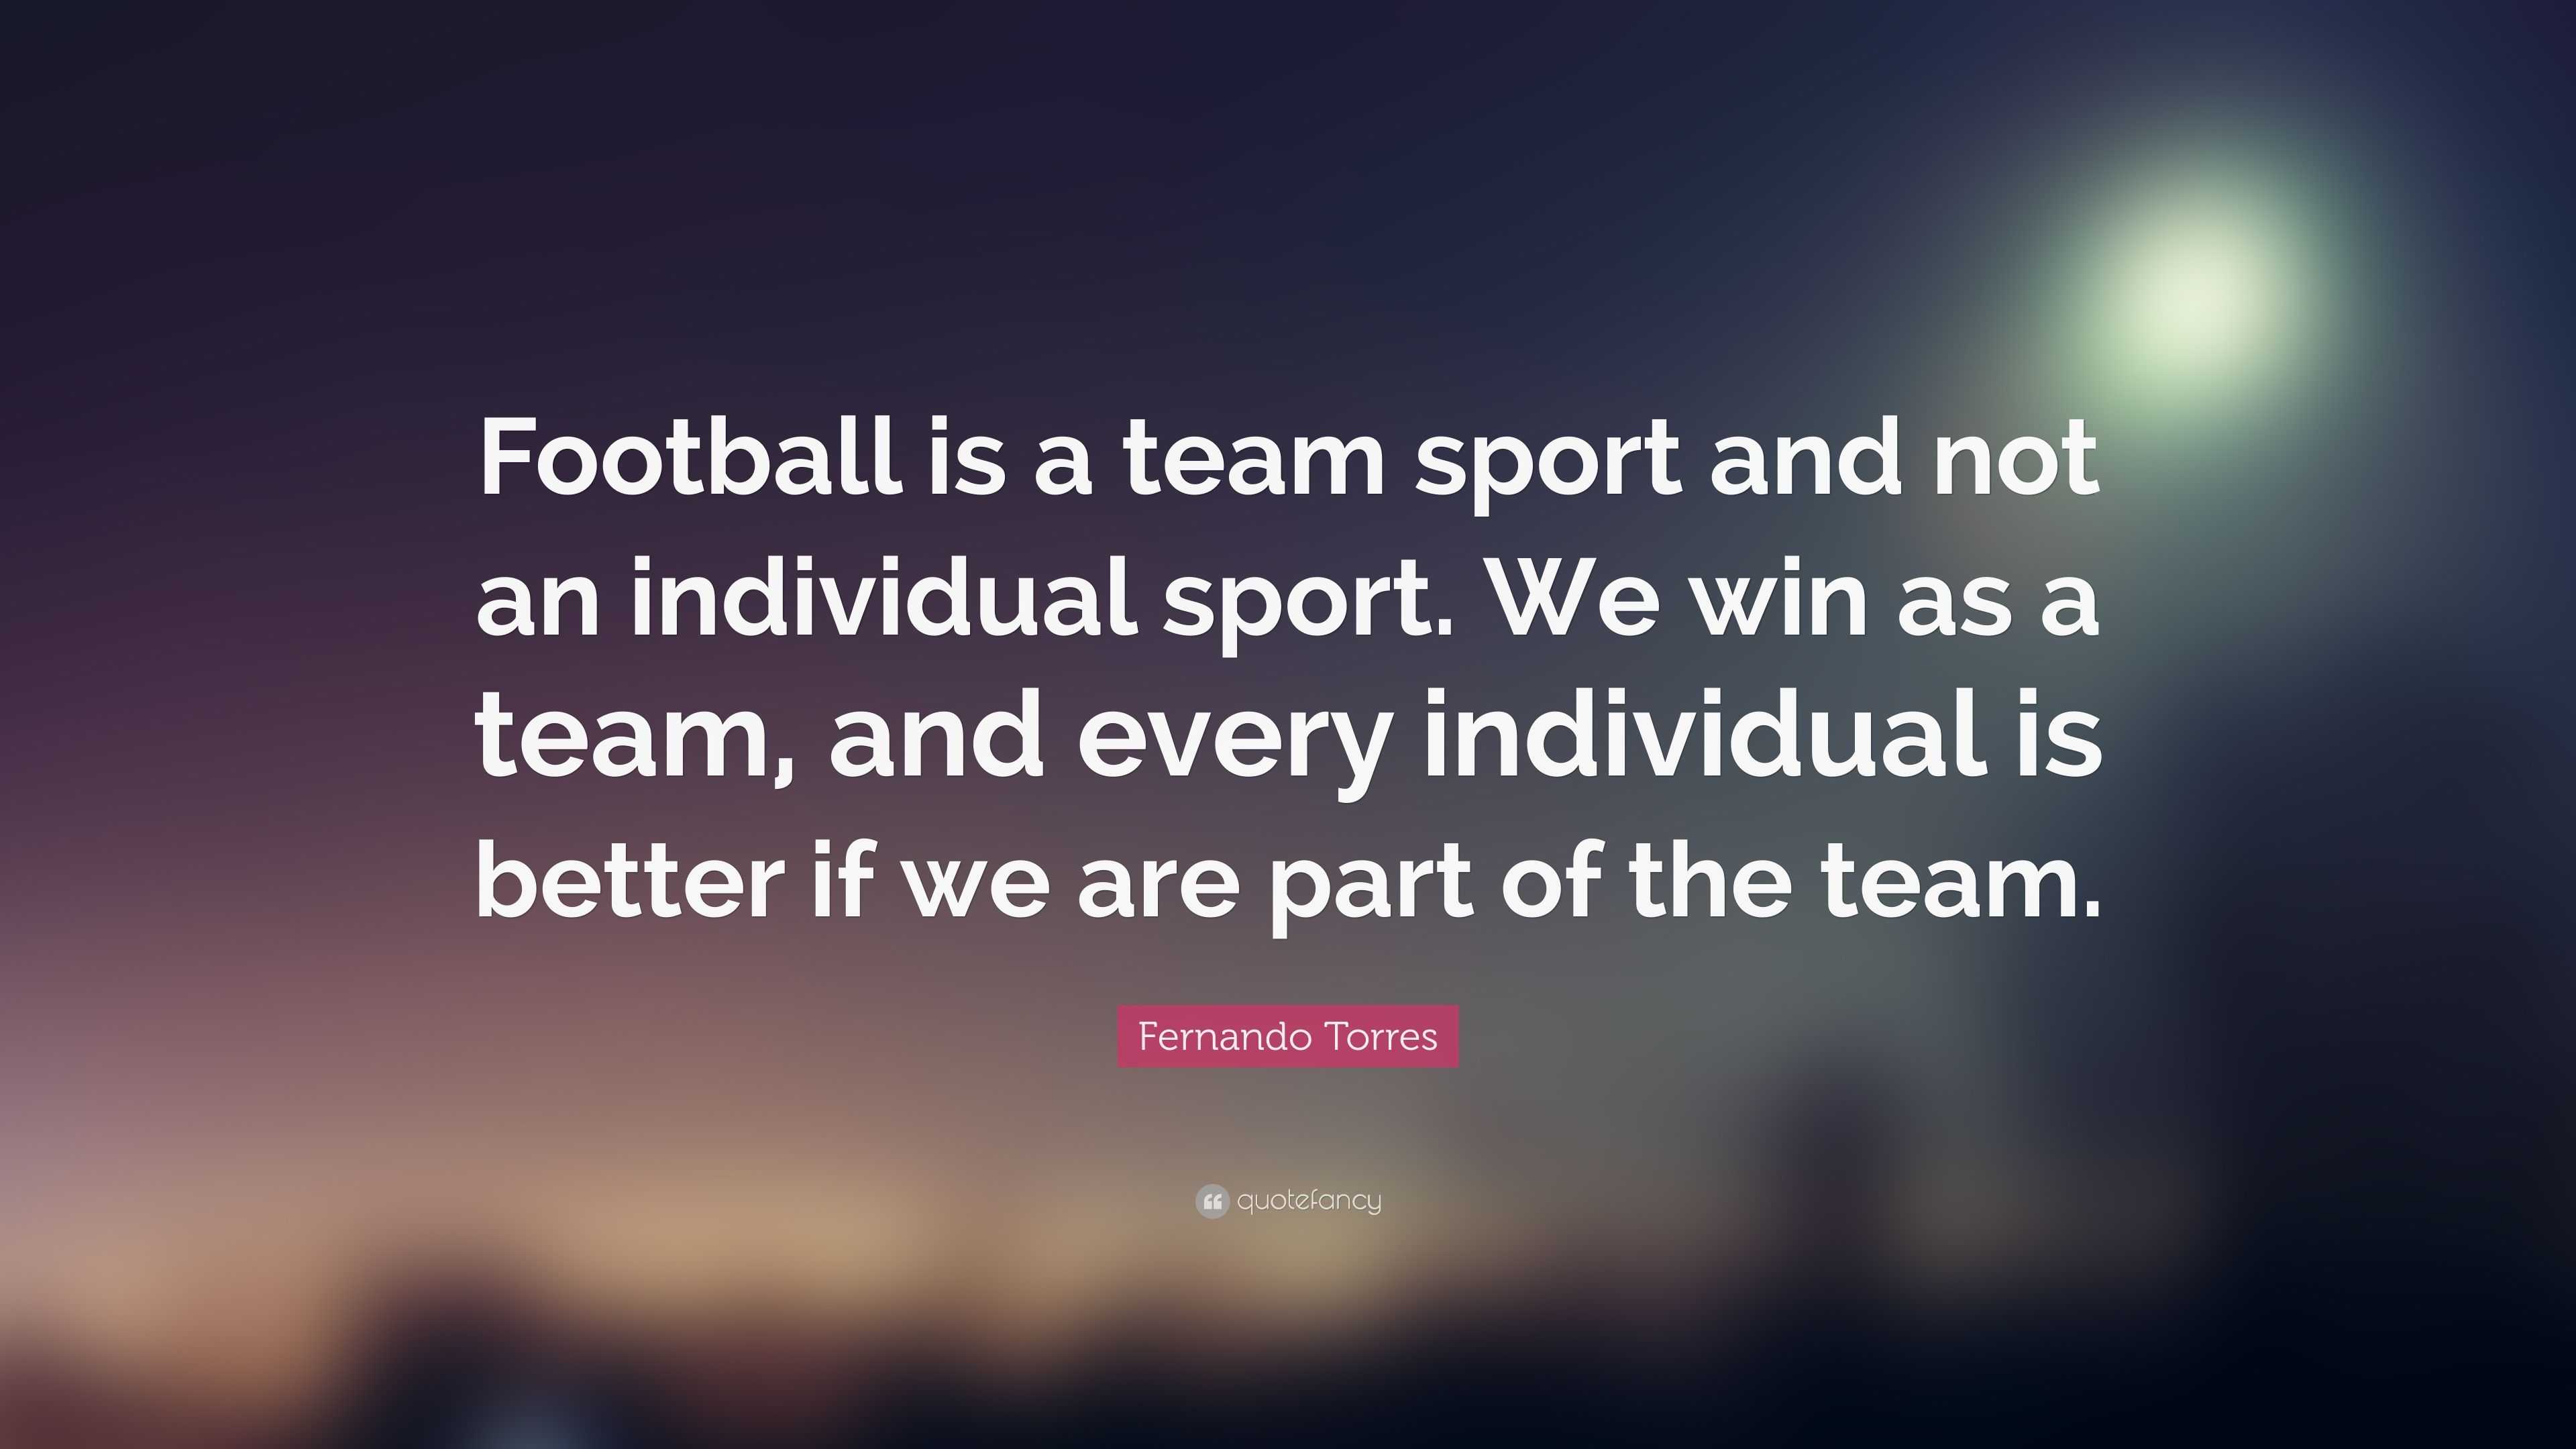 Fernando Torres Quote: “Football is a team sport and not an individual ...